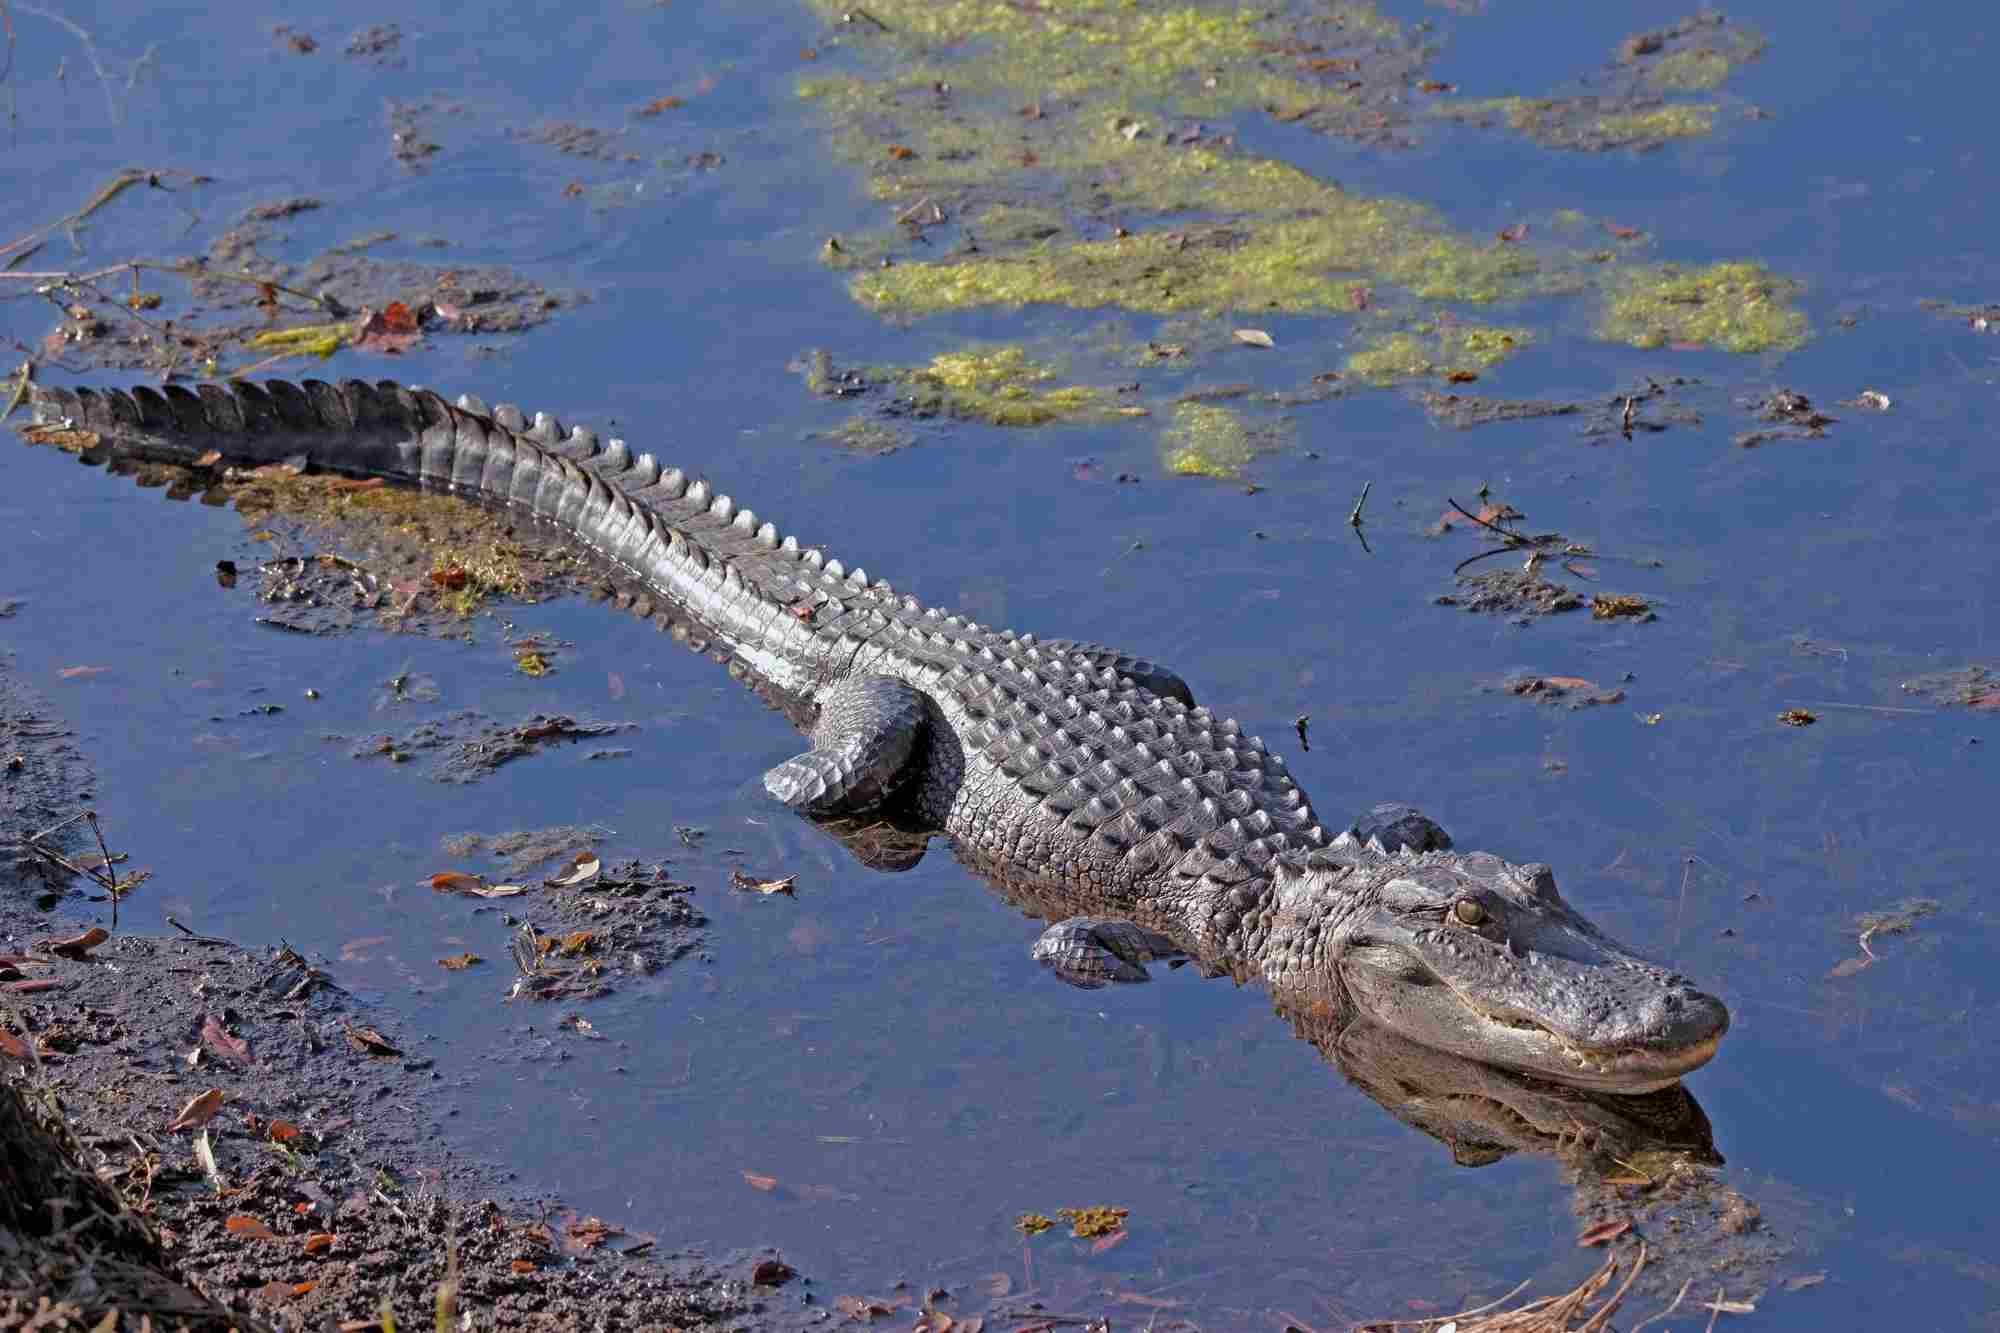 Alligator reproduction is one of the many interesting characteristics of the reptile.